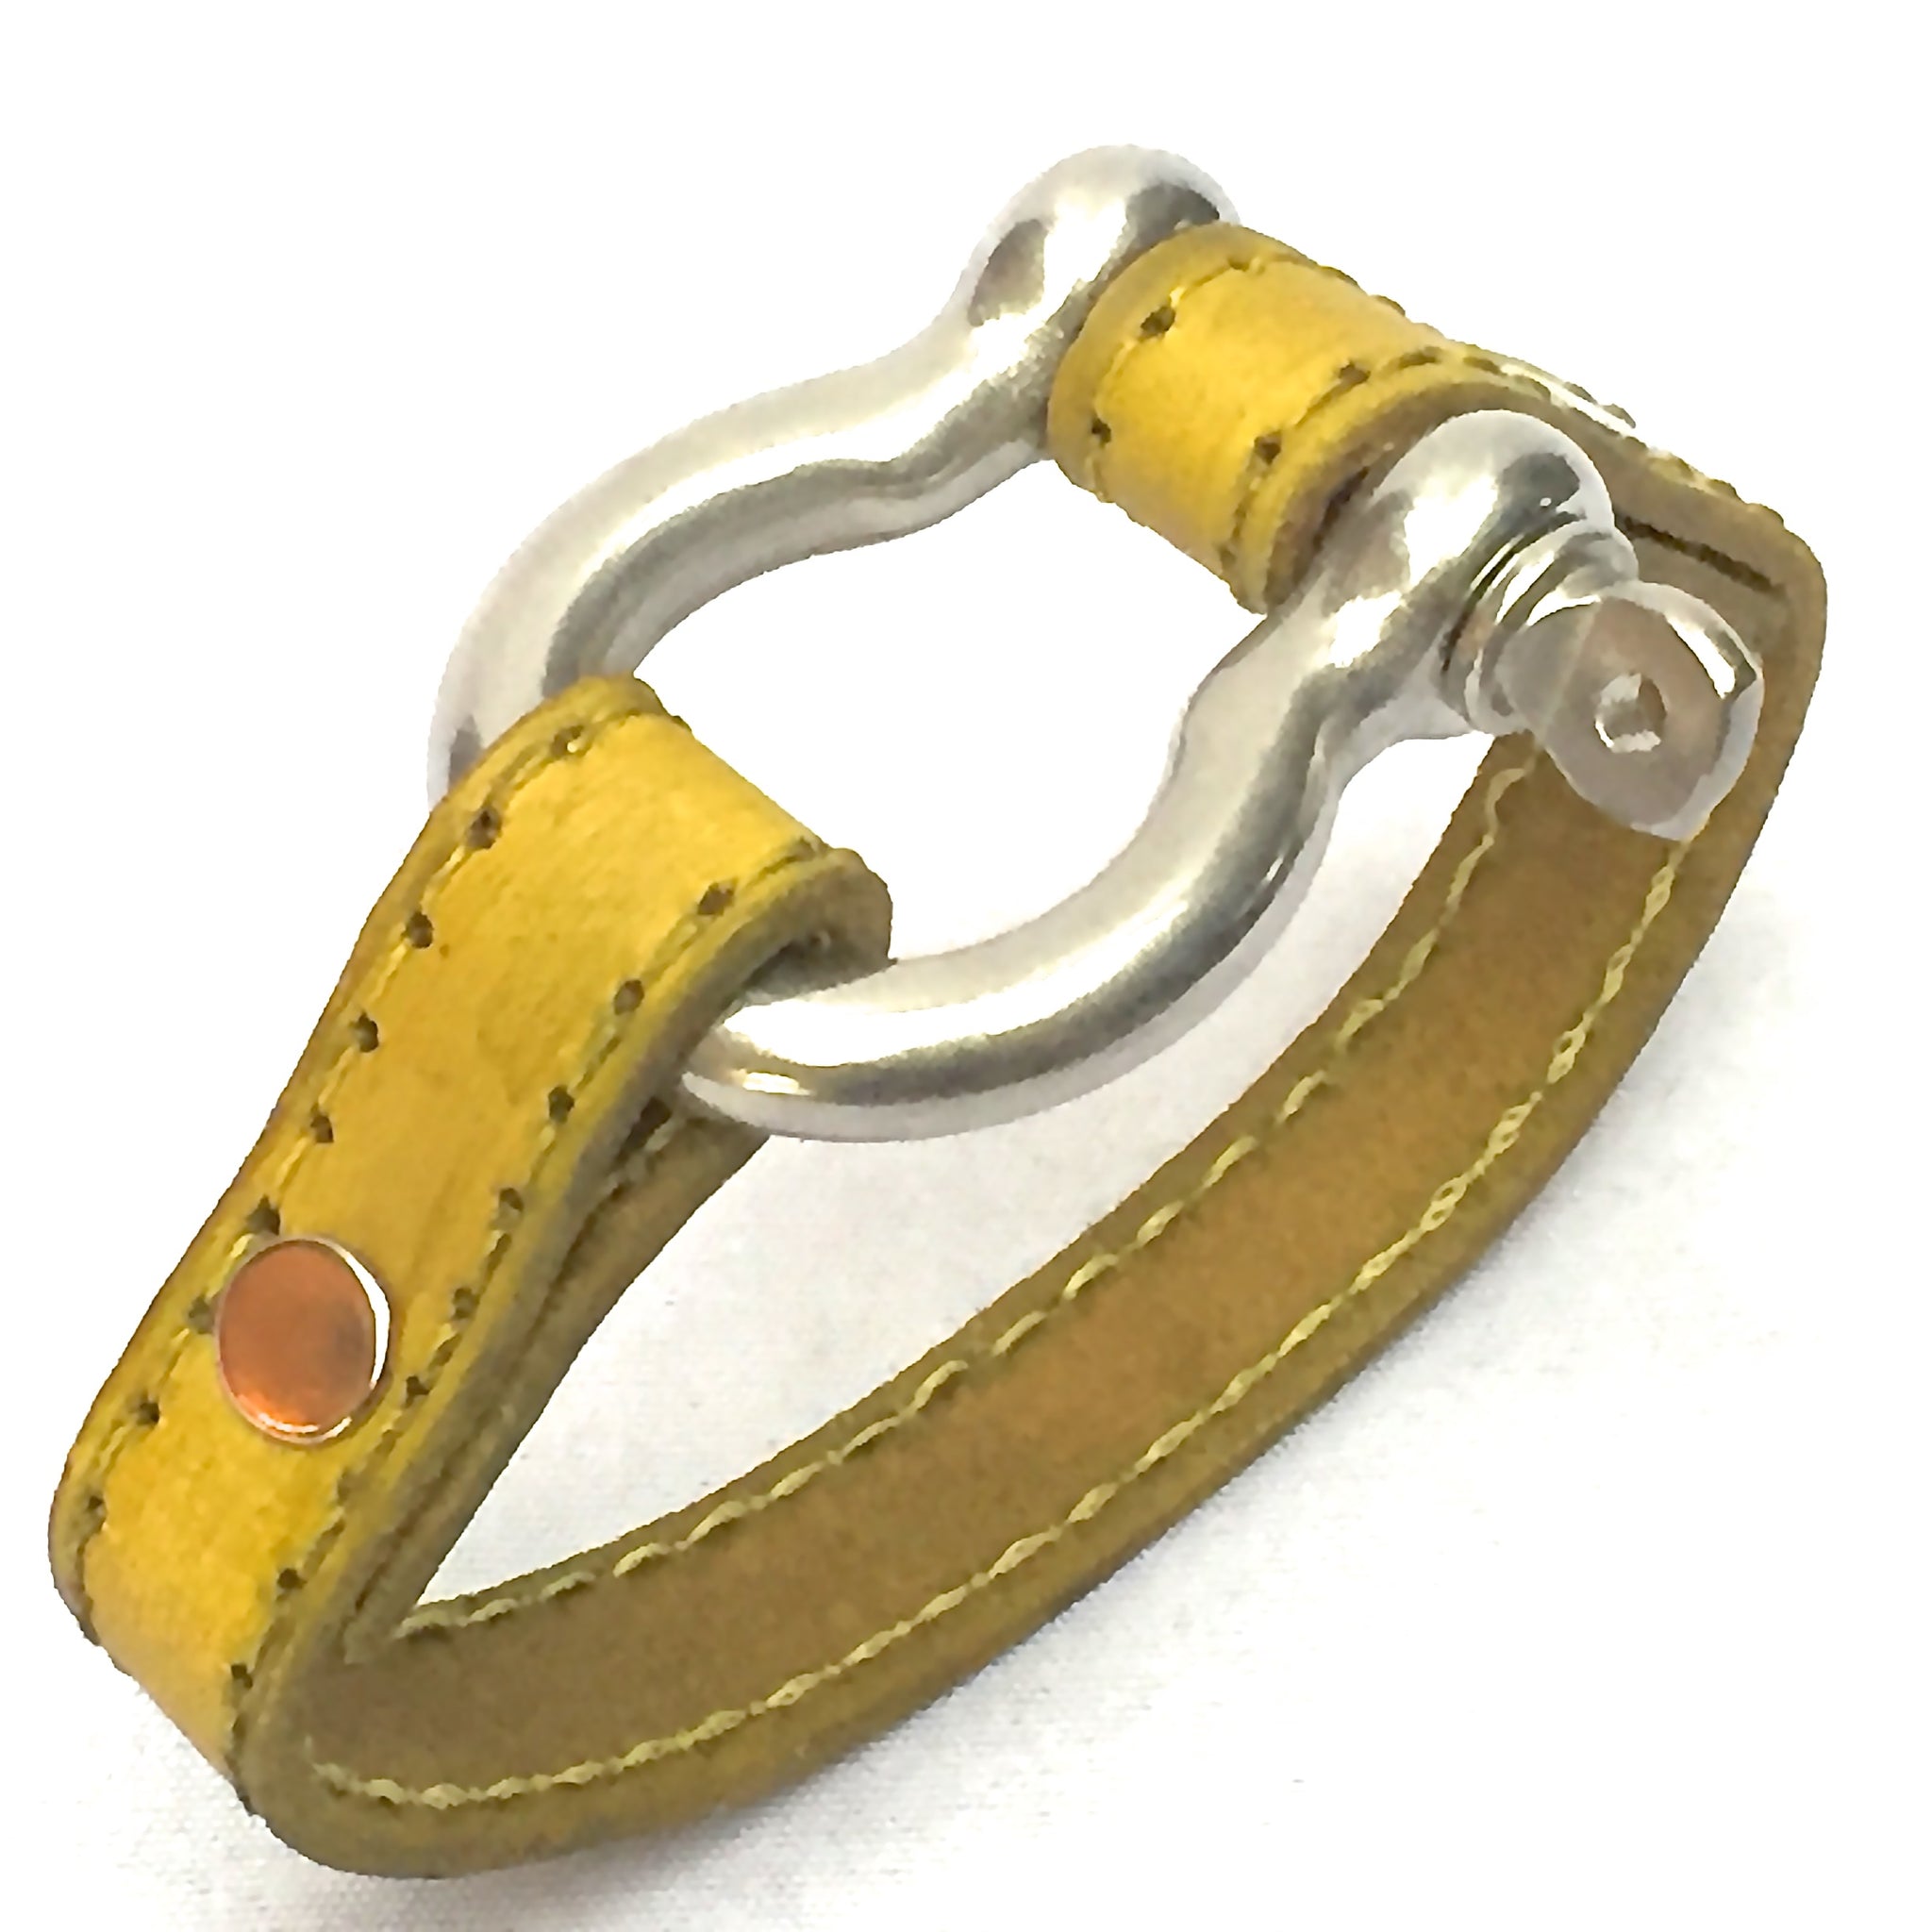 STITCHED LEATHER AND STAINLESS STEEL SHACKLE by nyet jewelry.